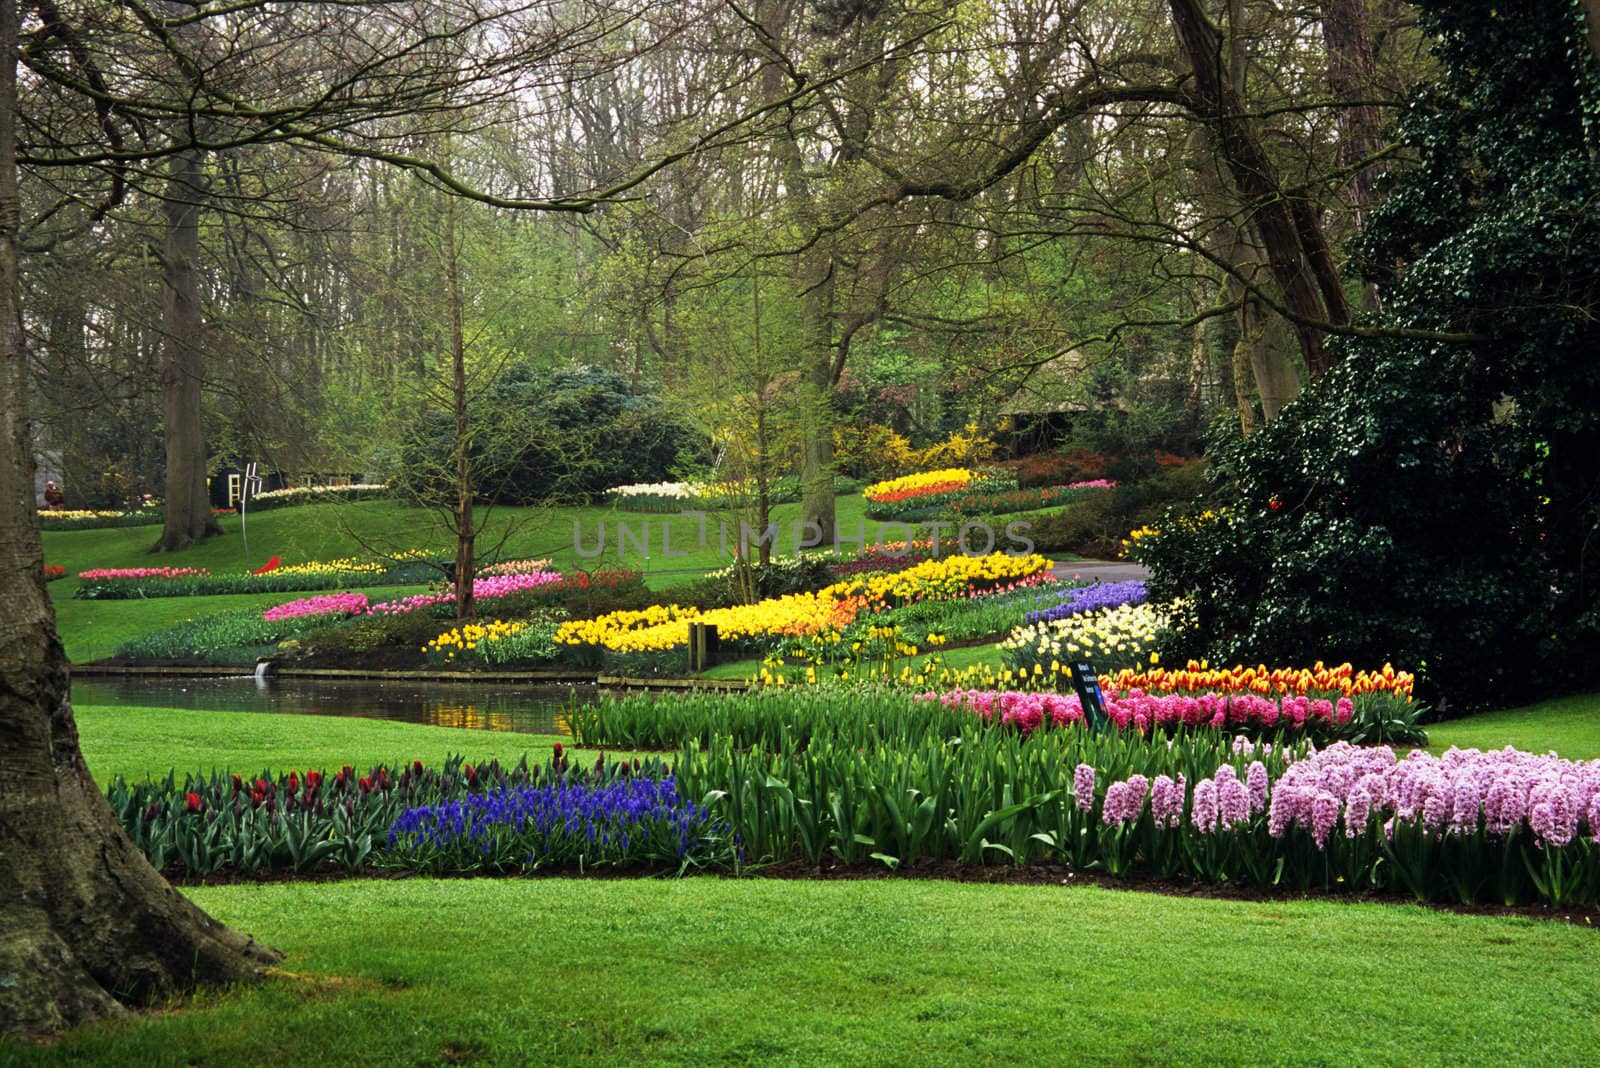 Thousands of hyacinths and tulips bloom in the spring in Keukenhof Gardens, Lisse, The Netherlands.